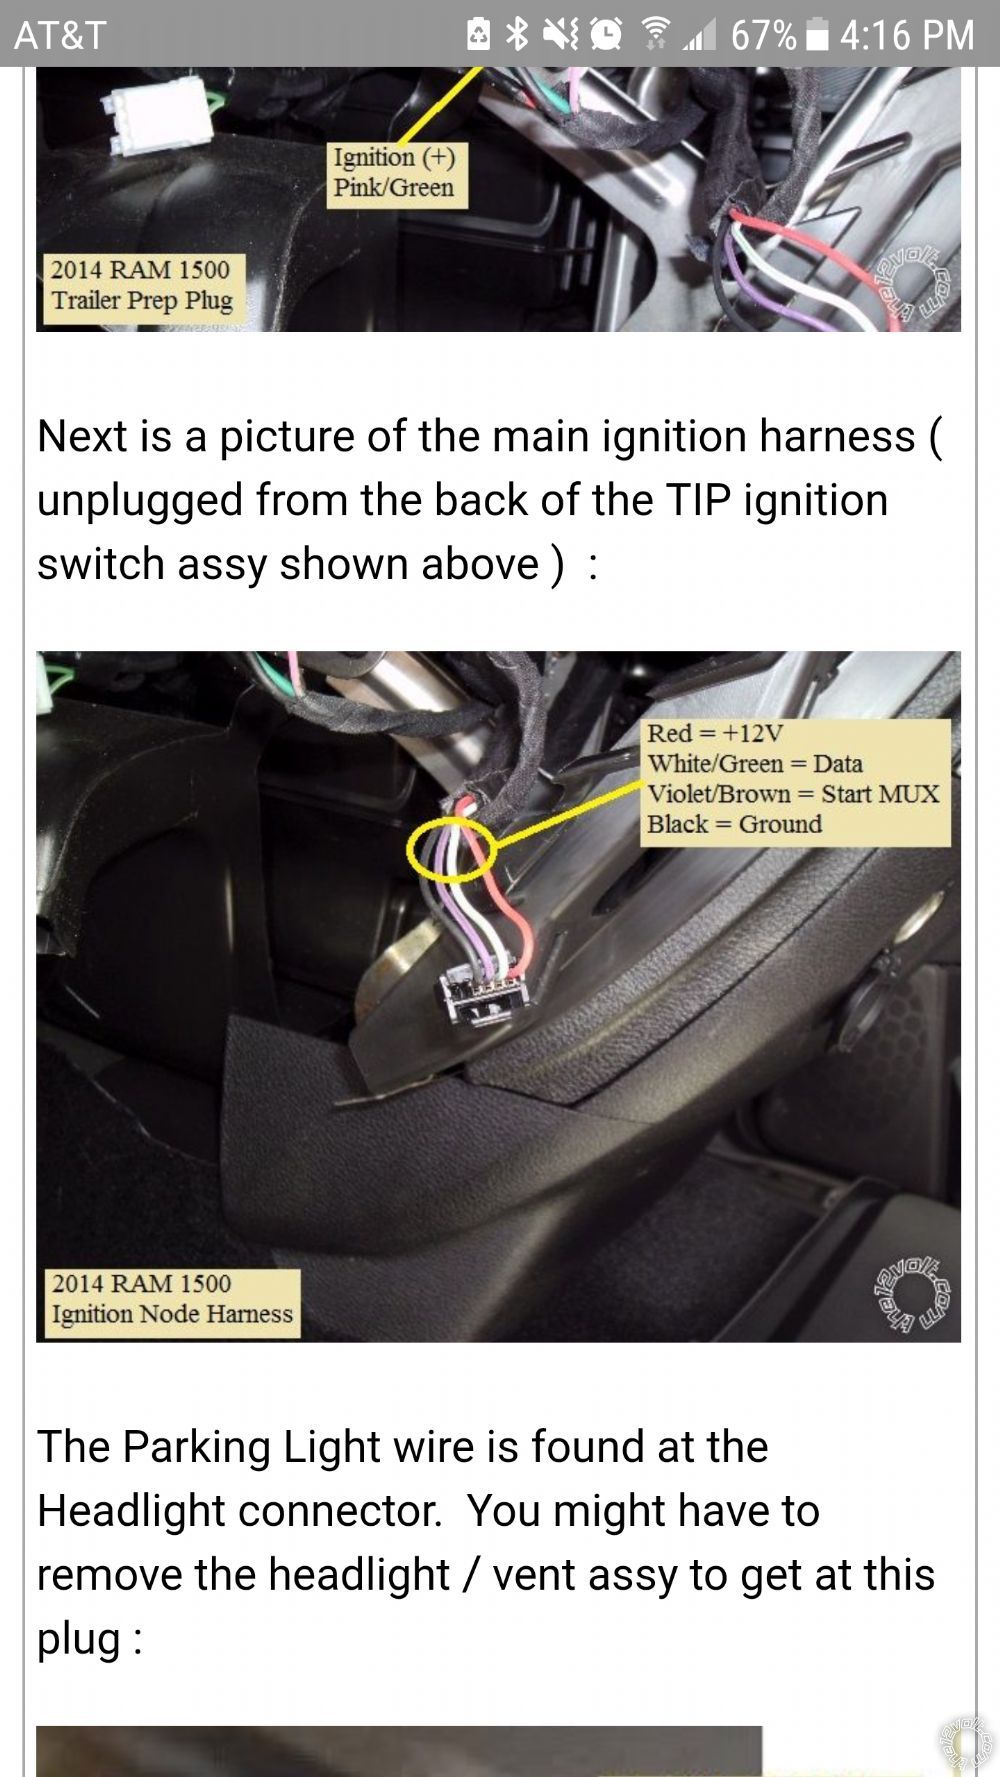 2016 Ram - Horn Wire -- posted image.